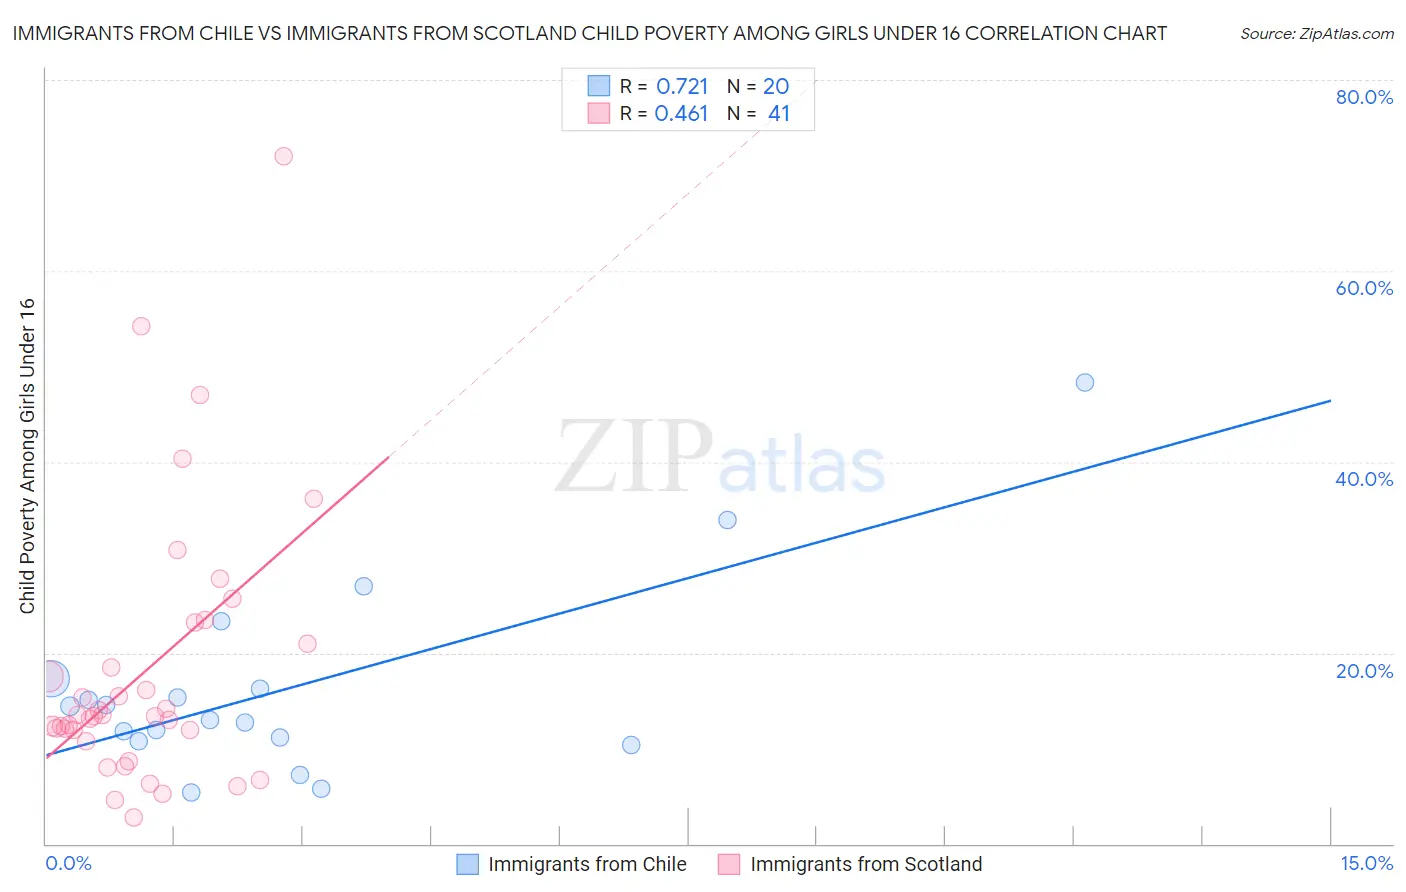 Immigrants from Chile vs Immigrants from Scotland Child Poverty Among Girls Under 16